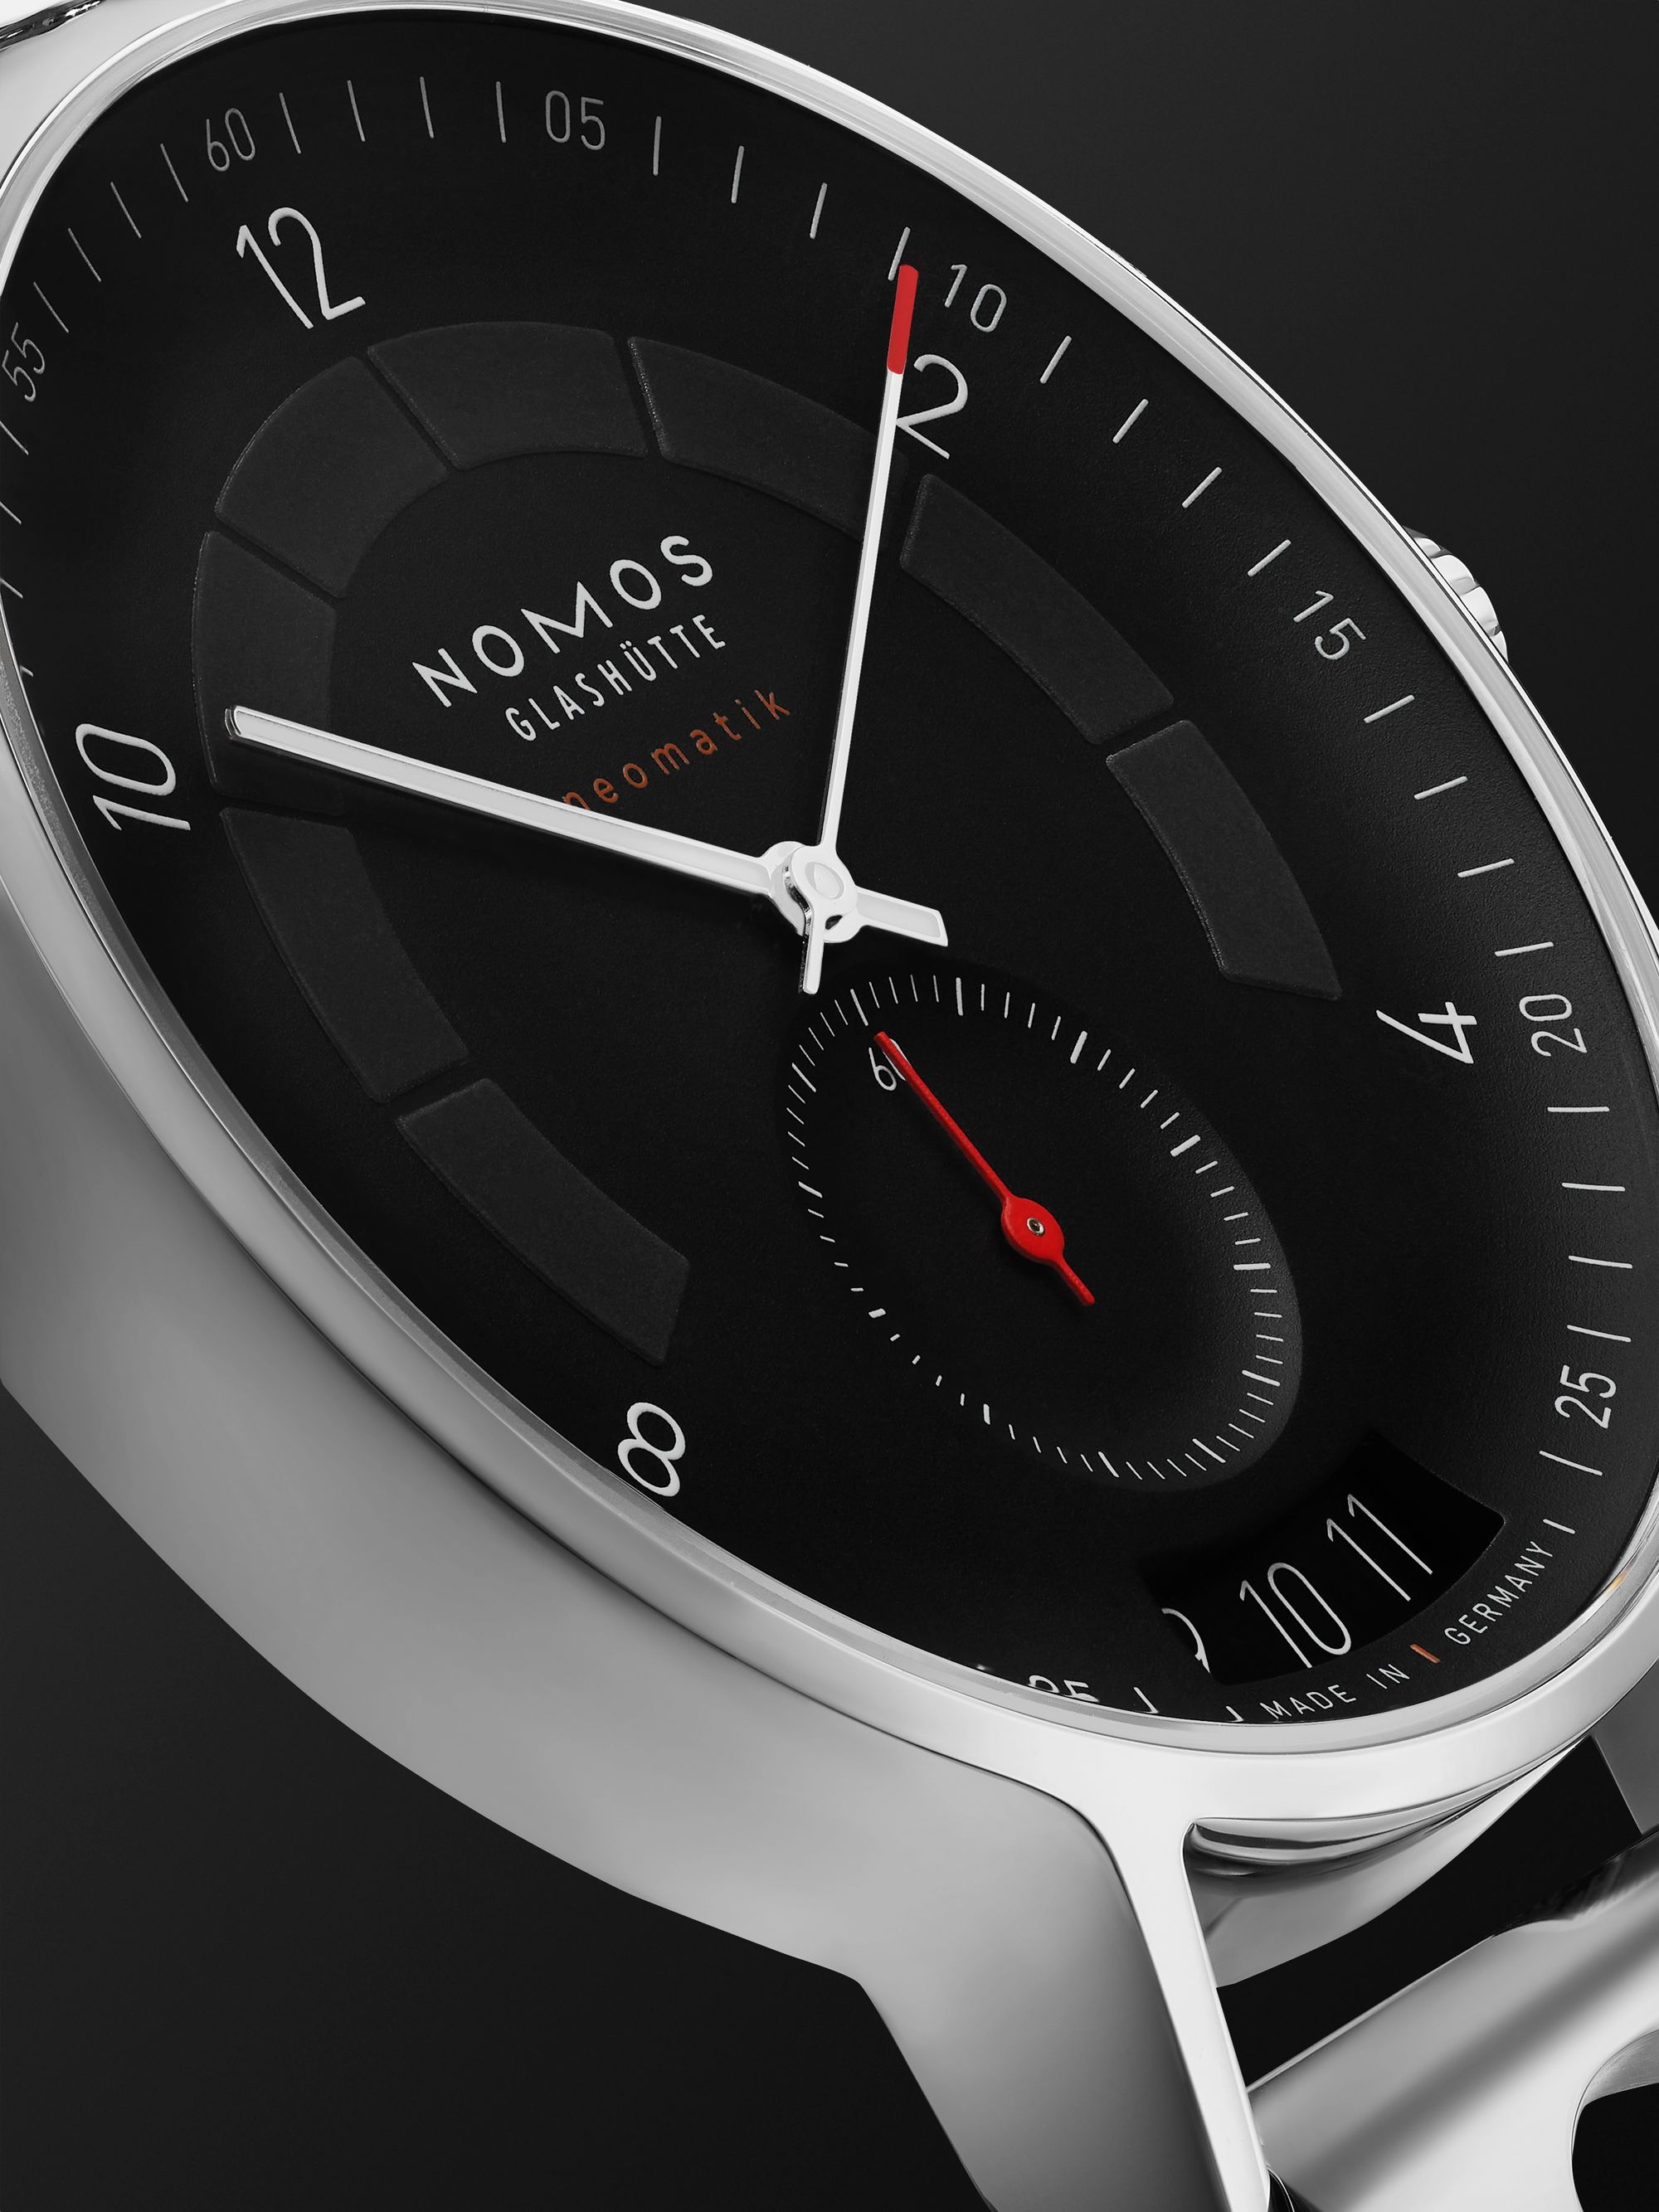 NOMOS GLASHÜTTE Autobahn Director‘s Cut A9 Limited Edition Automatic 41mm Stainless Steel Watch, Ref. No. 1301.S3